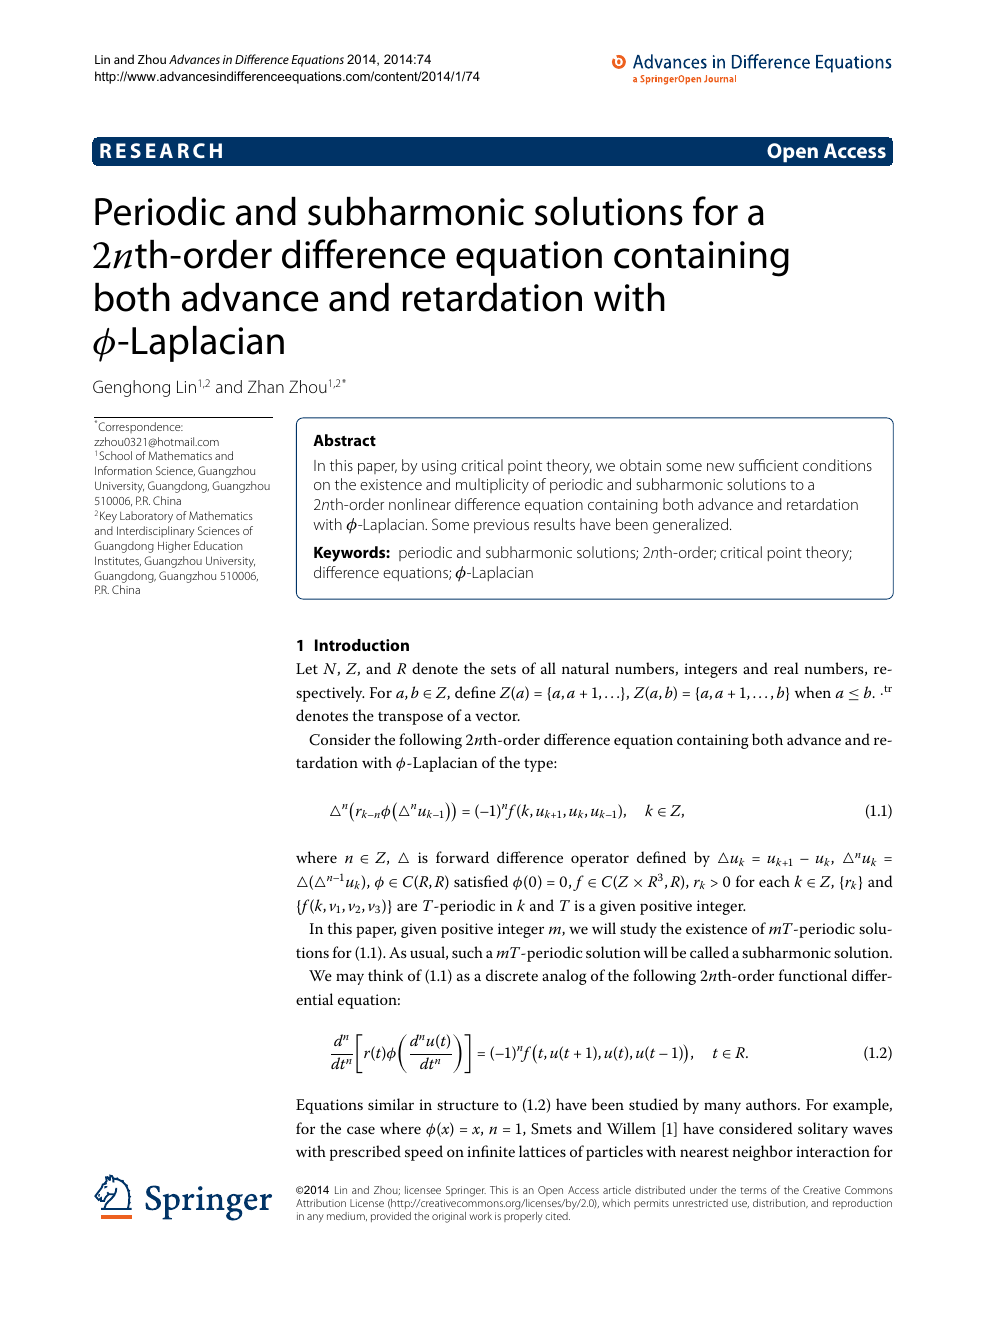 Periodic And Subharmonic Solutions For A 2nth Order Difference Equation Containing Both Advance And Retardation With ϕ Laplacian Topic Of Research Paper In Mathematics Download Scholarly Article Pdf And Read For Free On